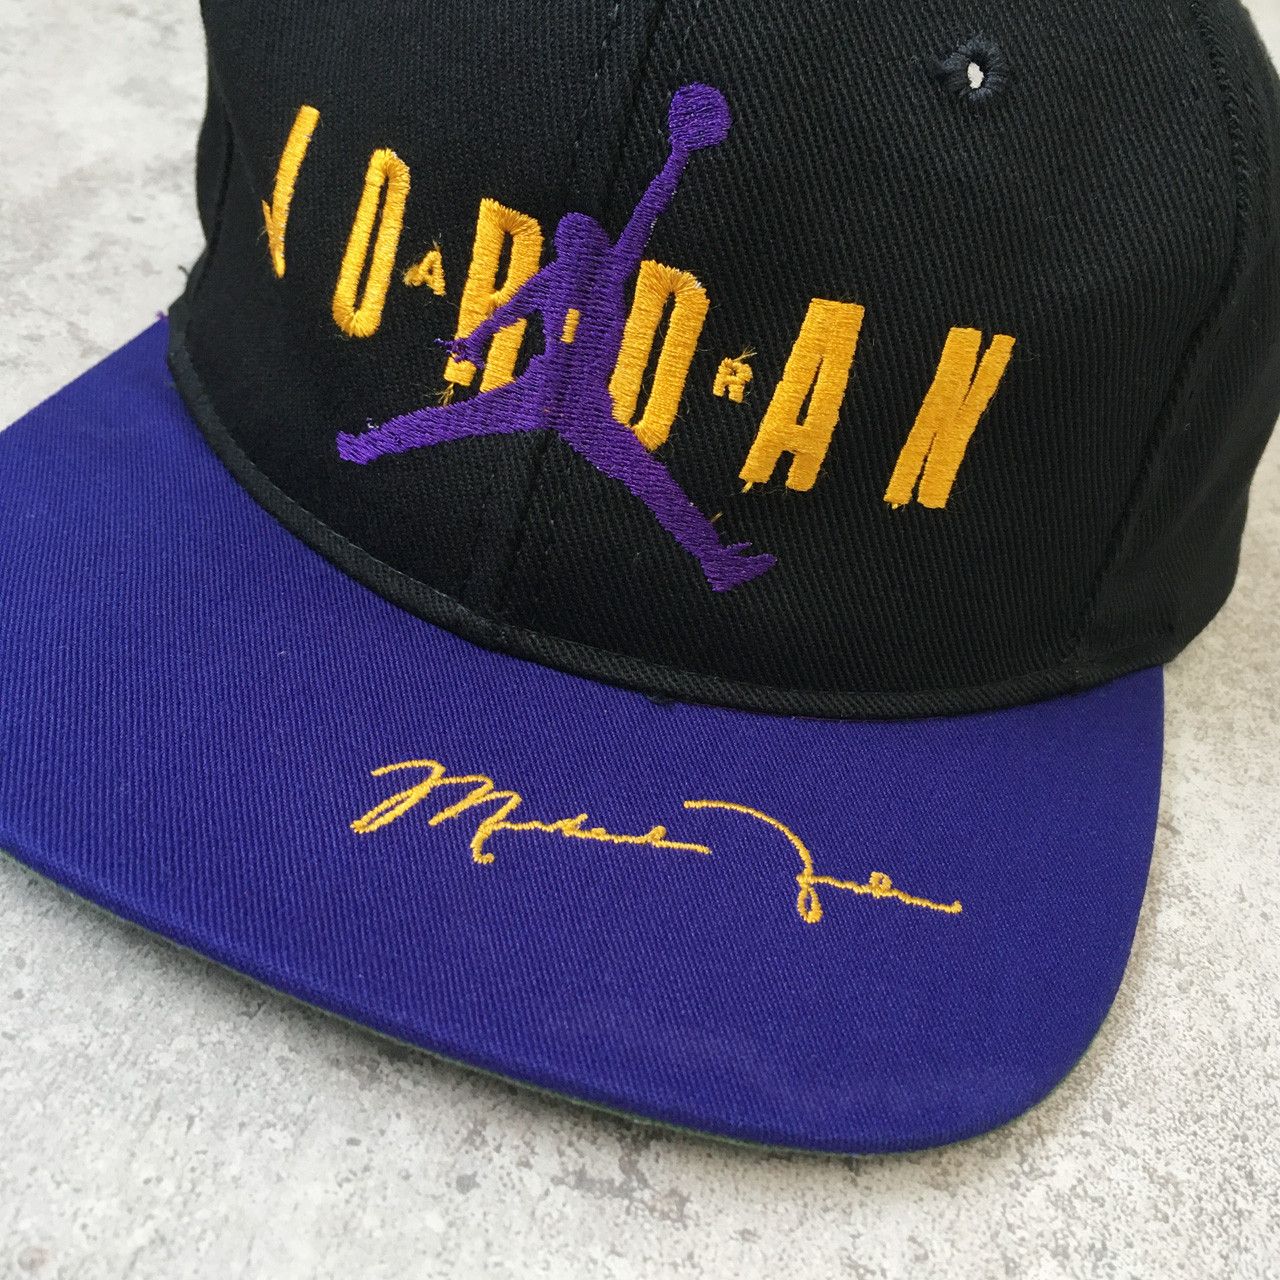 Nike VTG 90S Nike Jordan SNAPBACK HAT MADE IN USA PURPLE YELLOW Size ONE SIZE - 2 Preview